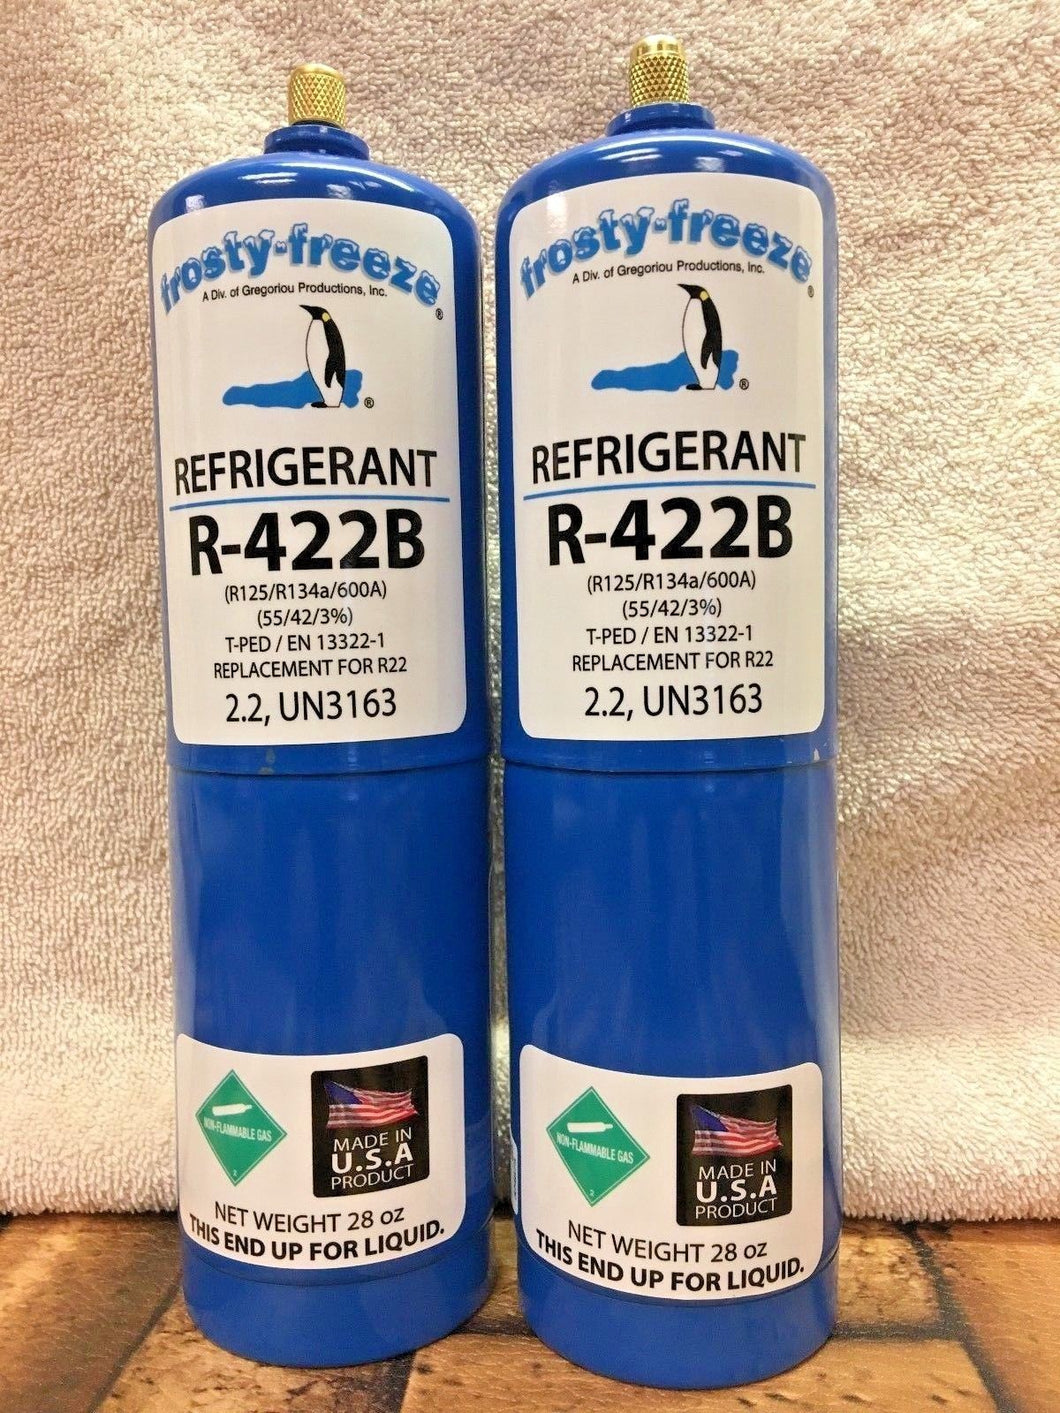 Refrigerant R422B, R-422B, (2) 28 oz. Disposable Cans, R22, R-22 Replacement